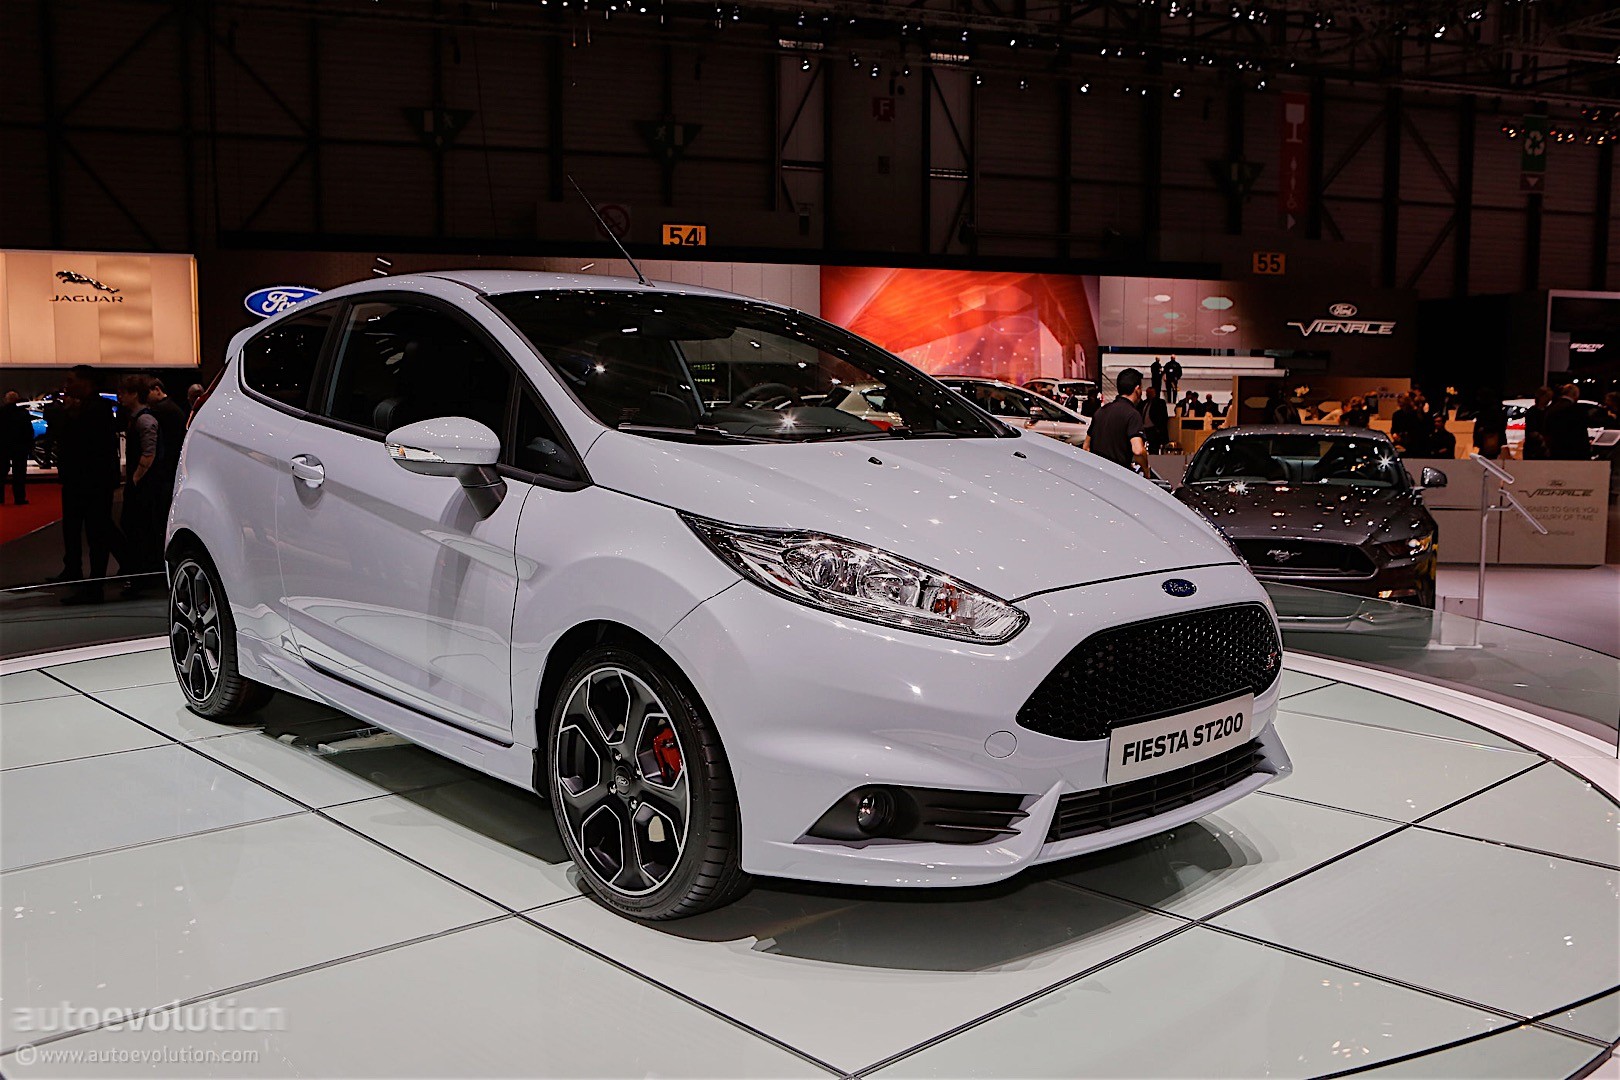 Ford Fiesta St200 Unveiled In Geneva Looks Just Right